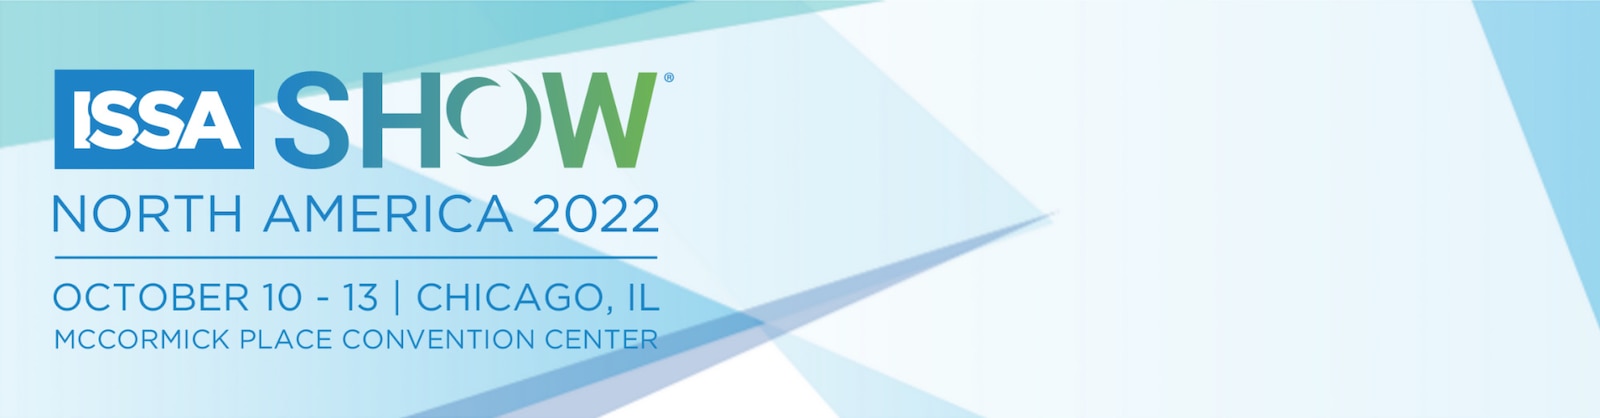 Logo for ISSA Show – North America 2022, October 10-13 in Chicago, IL at McCormick Place Convention Center